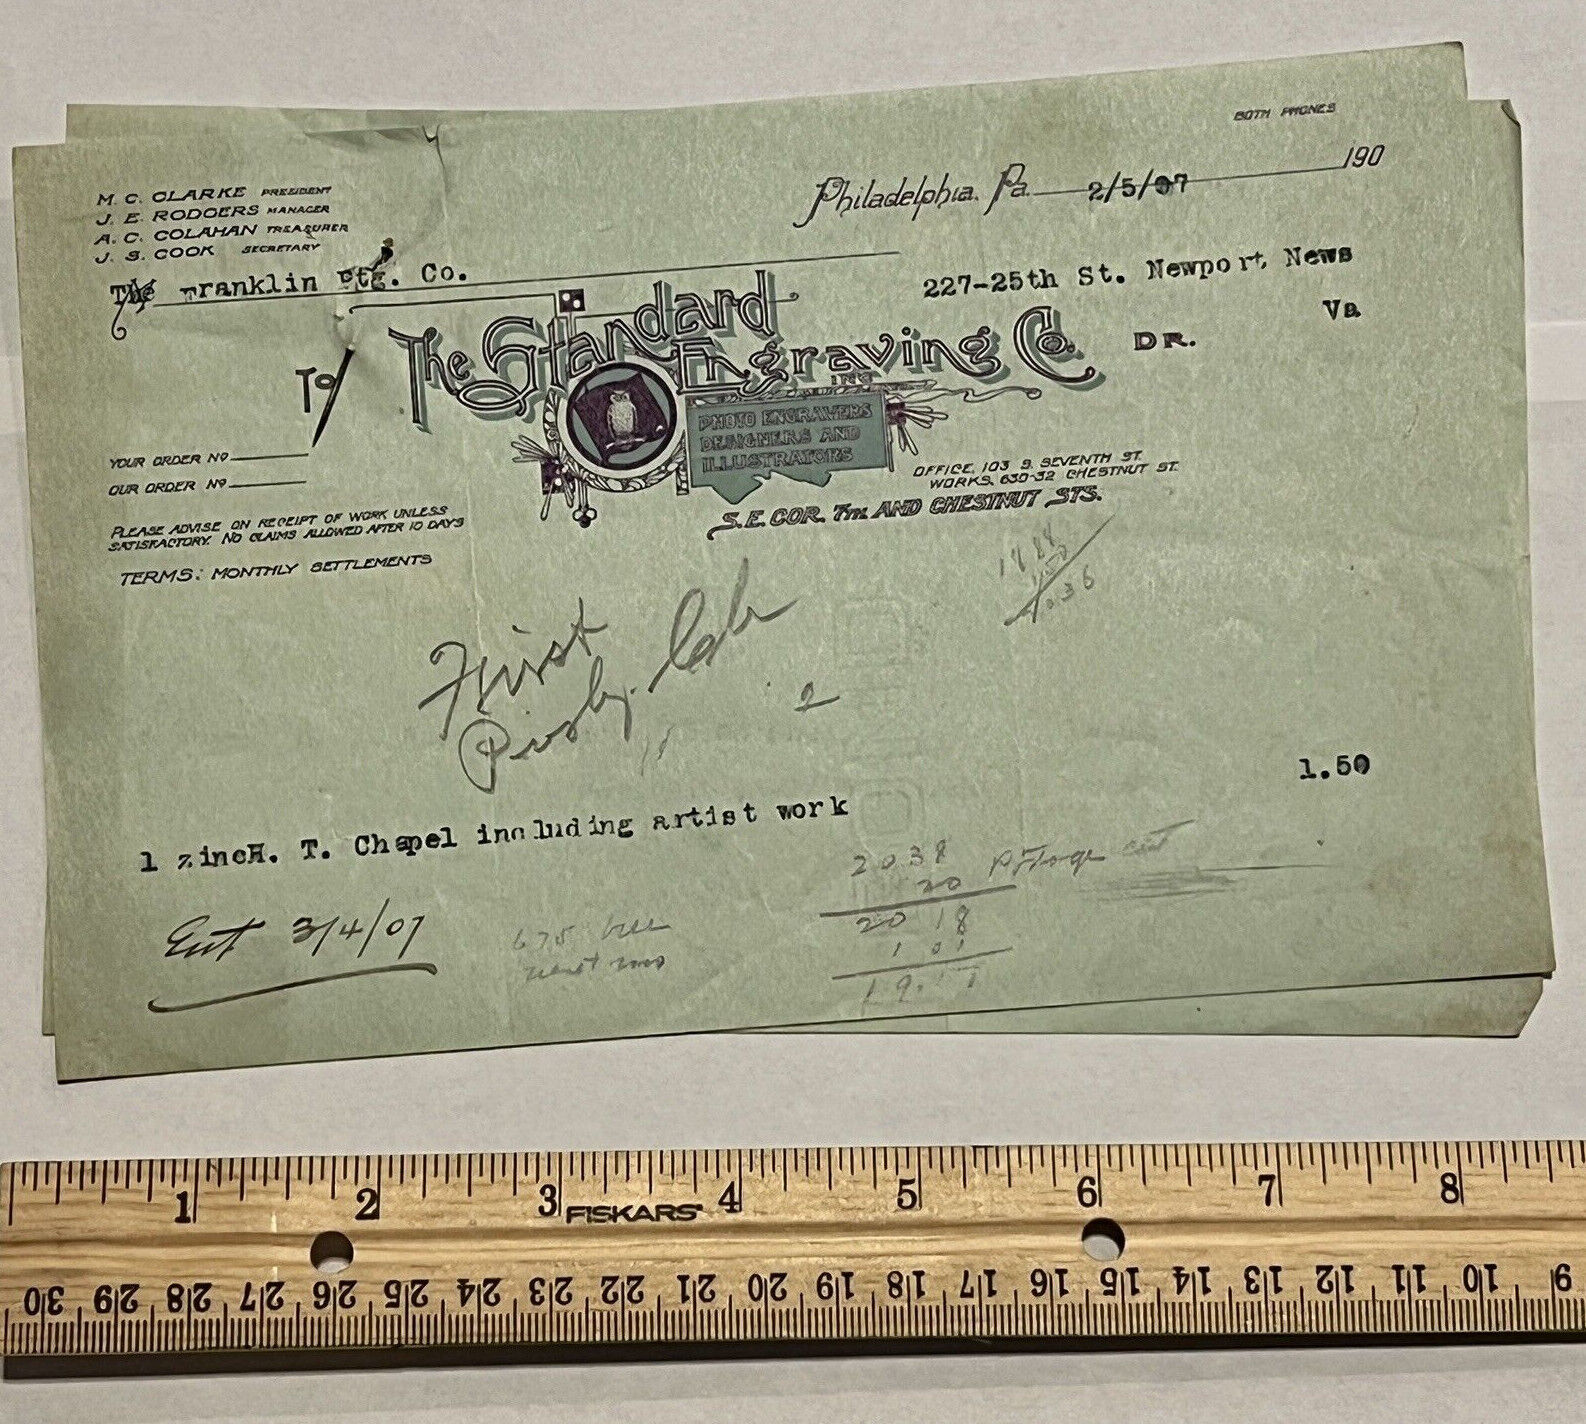 1907 THE STANDARD ENGRAVING COMPANY PHILADELPHIA RECEIPTS STAPLED BY NAIL